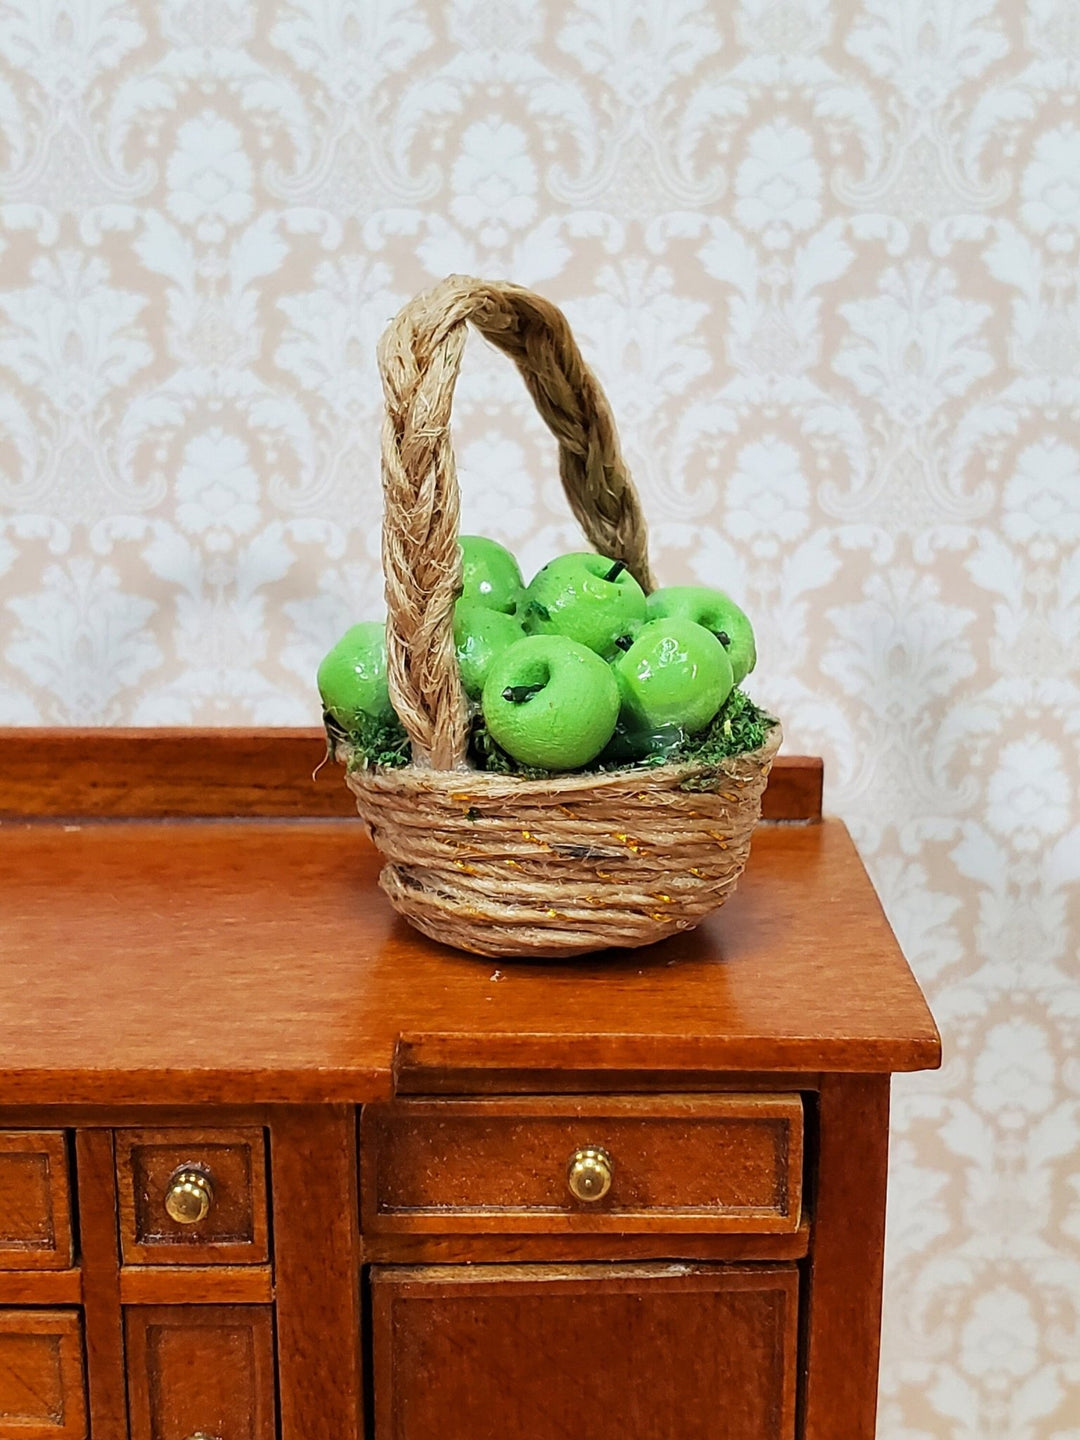 Dollhouse Basket of Green Apples 1:12 Scale Miniature Kitchen Food Groceries - Miniature Crush